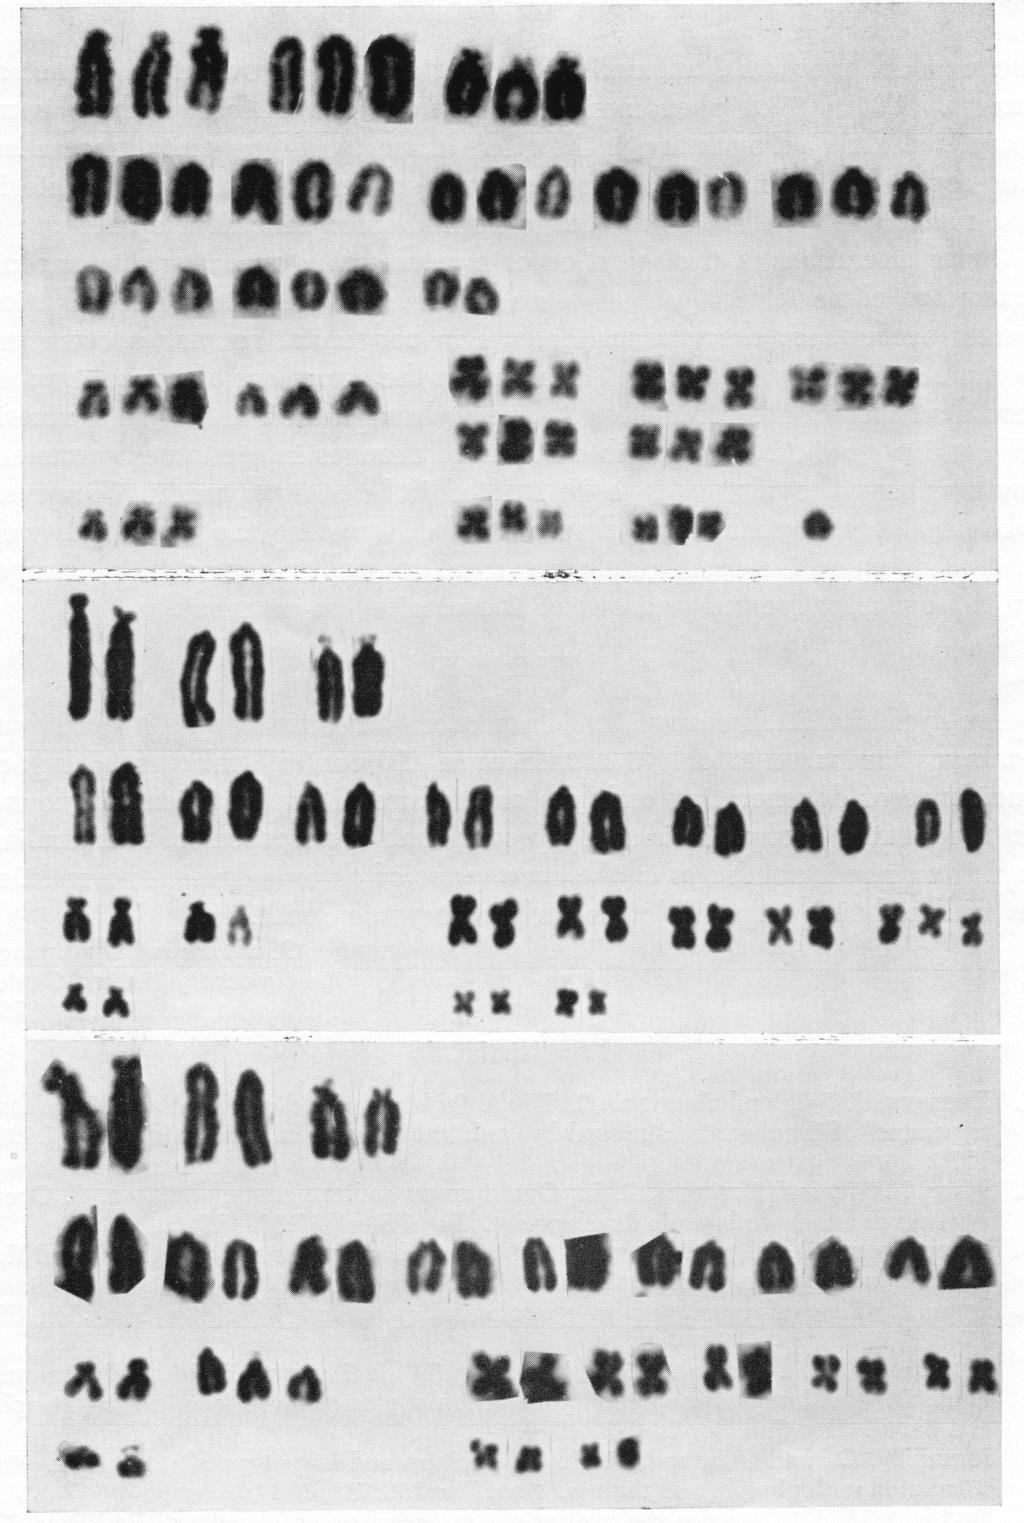 Triploid condition with XXY sex chromosomes. Fig. 3 (center).